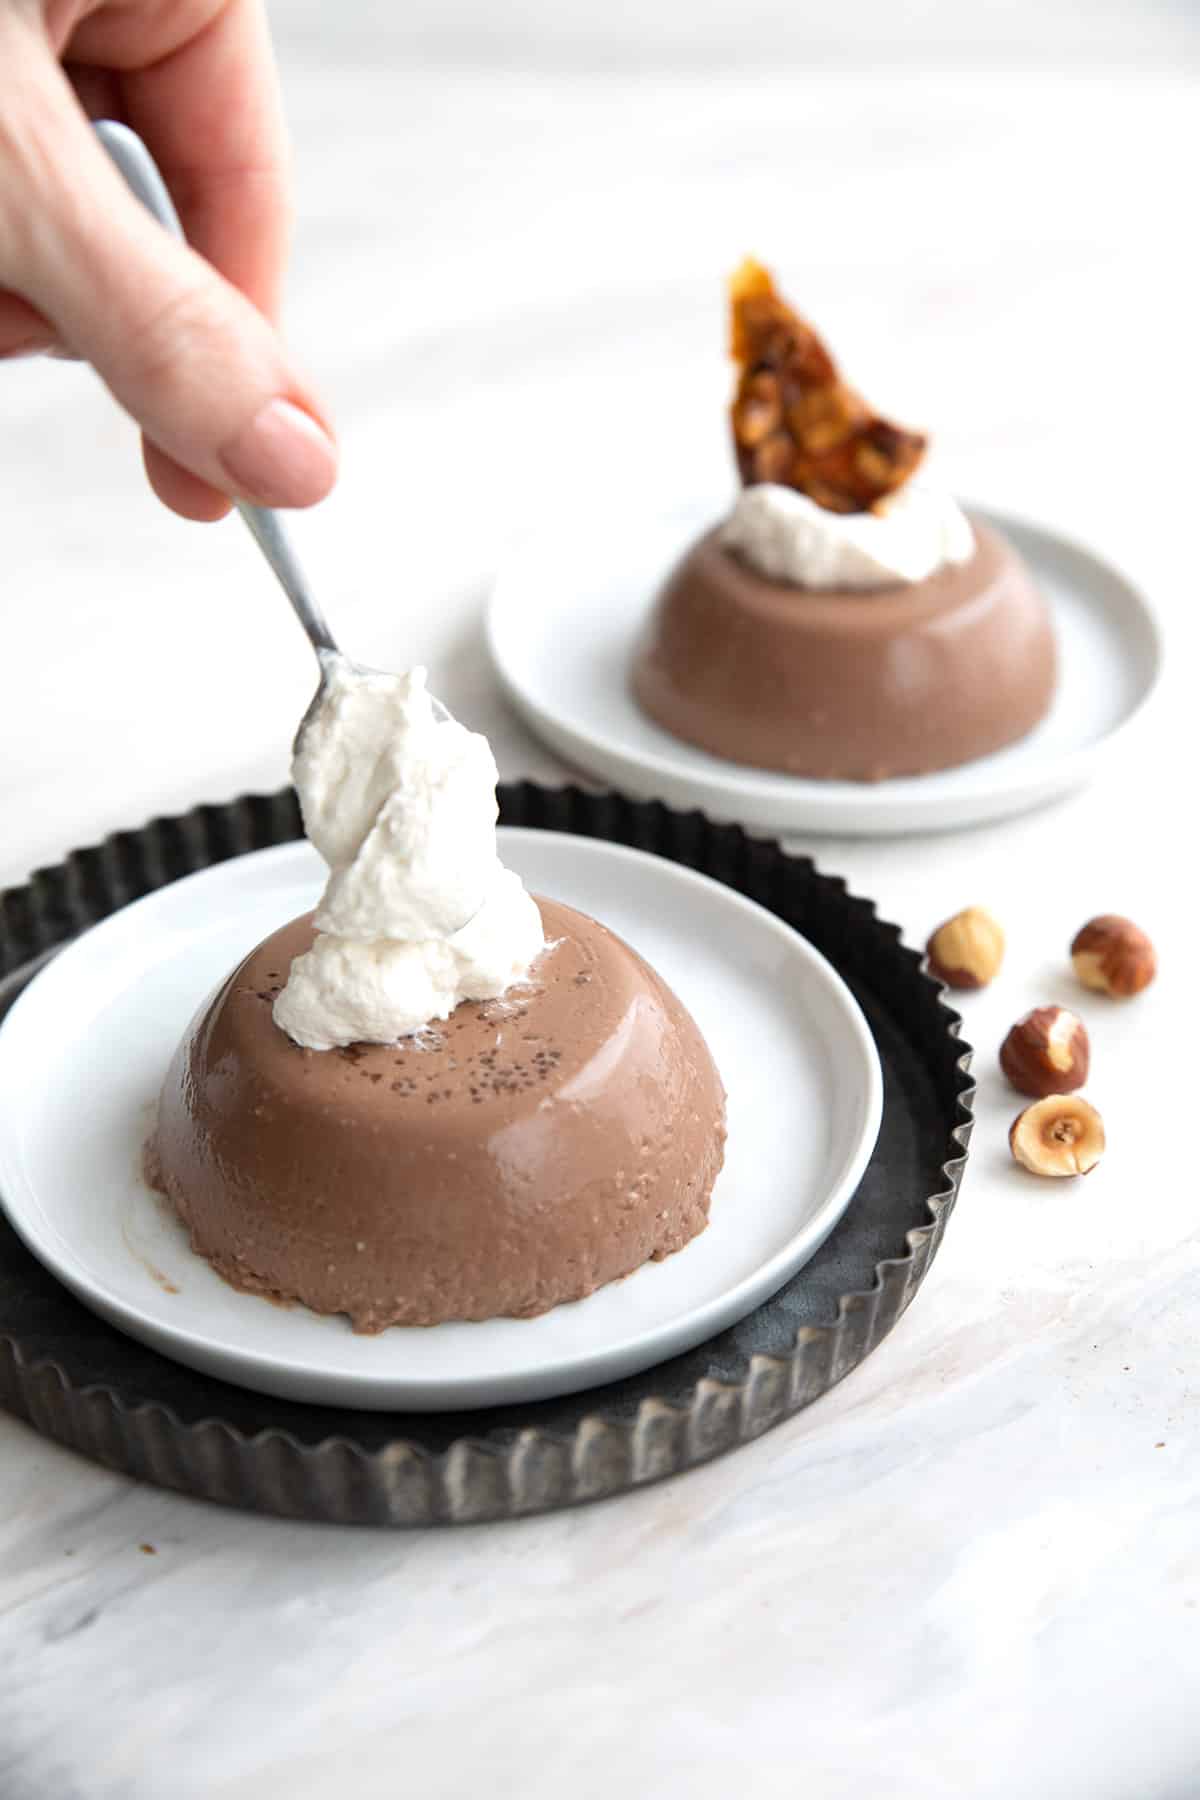 A hand dolloping whipped cream onto chocolate panna cotta.